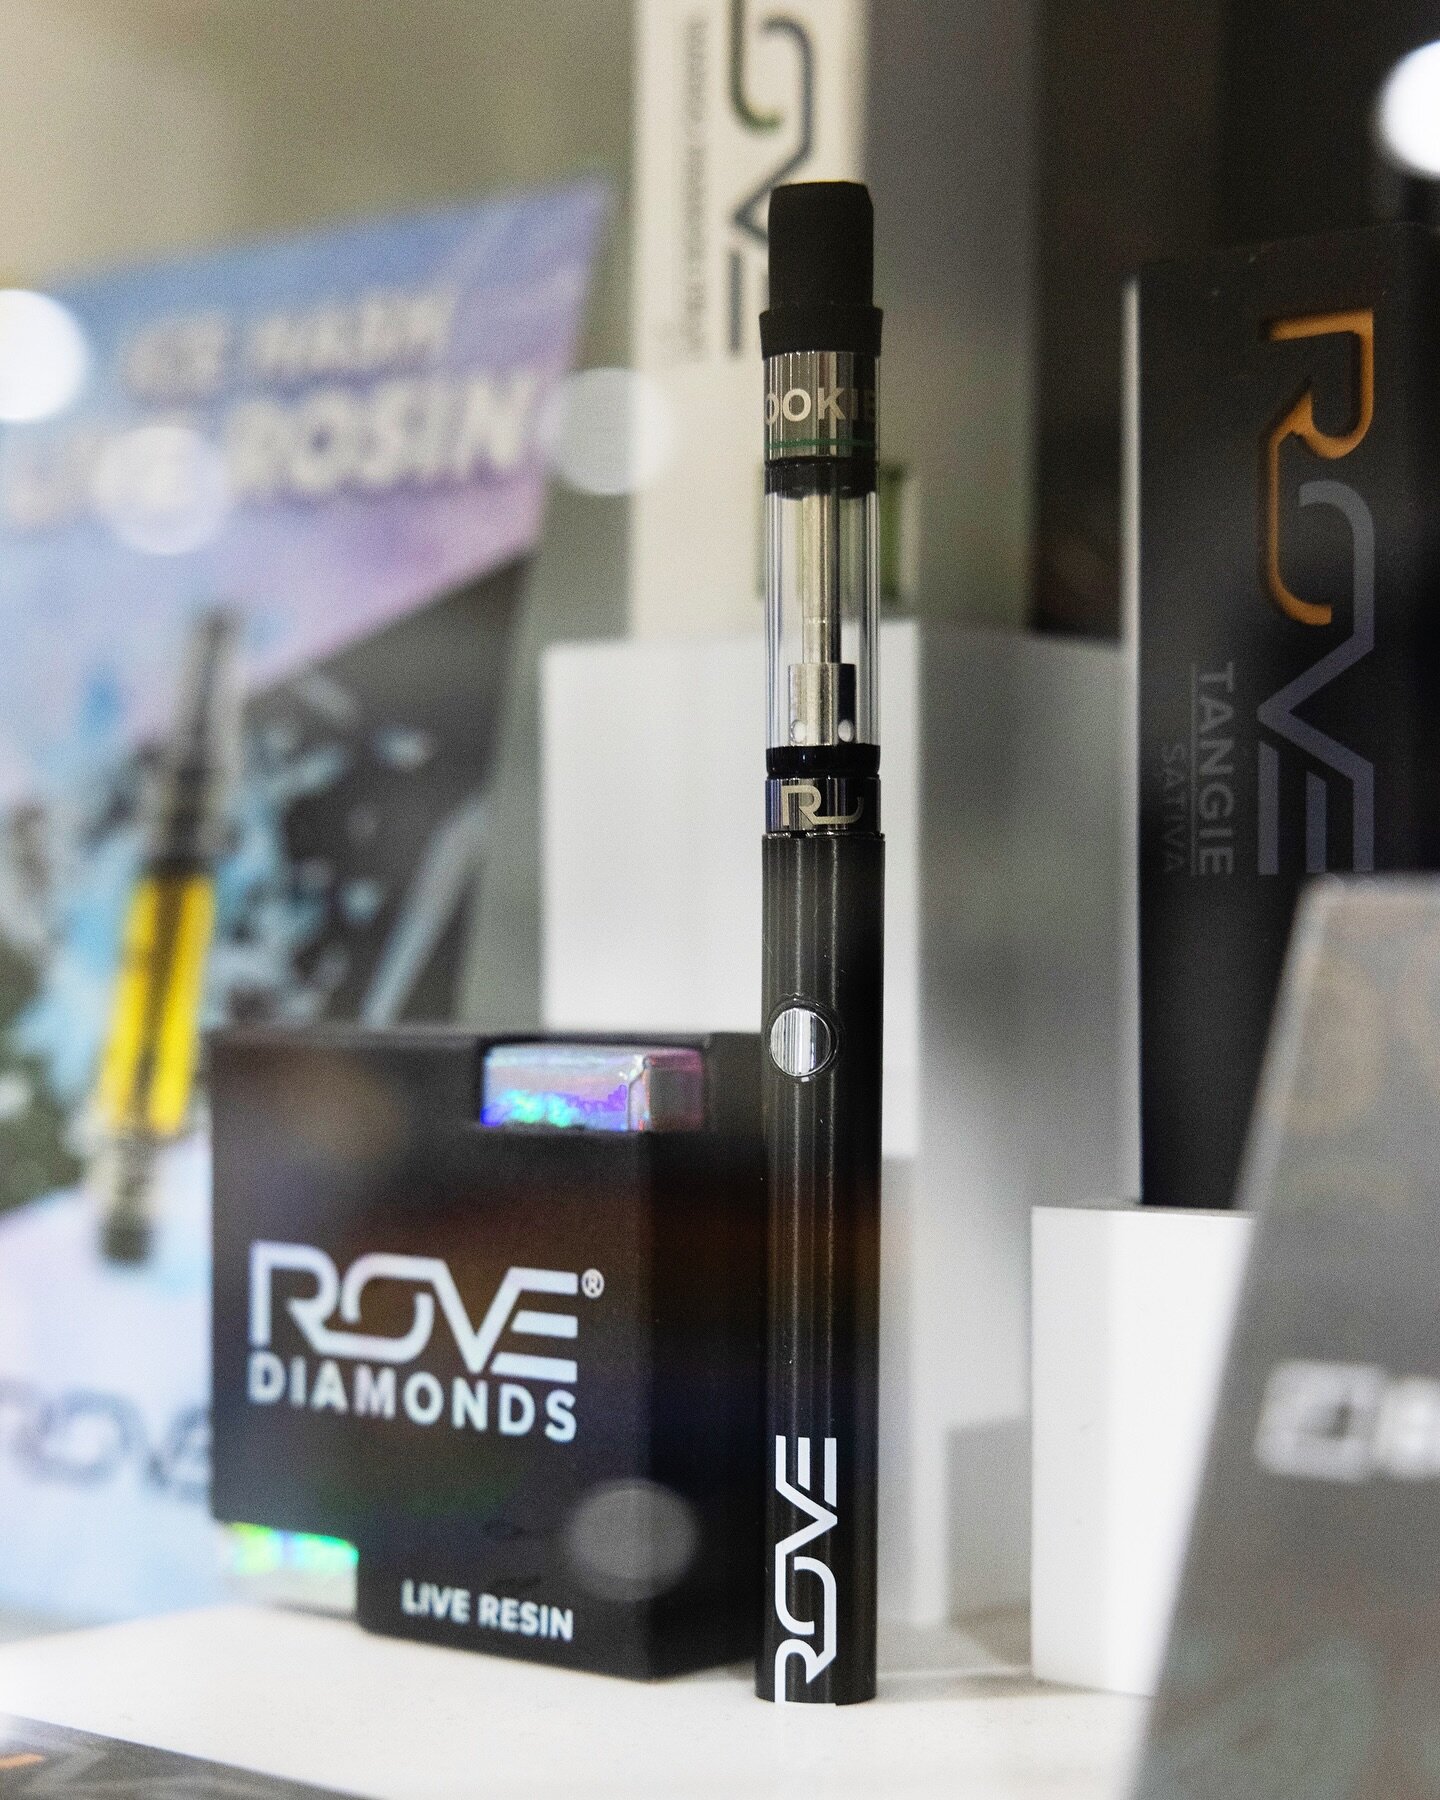 Step into High Season and let Rove&rsquo;s Live Resin Diamonds transform your experience. With unmatched purity and potency, it&rsquo;s more than just vaping; it&rsquo;s a lifestyle. 🌟🍃 #highseason #adelanto #morenovalley #keepgrowing